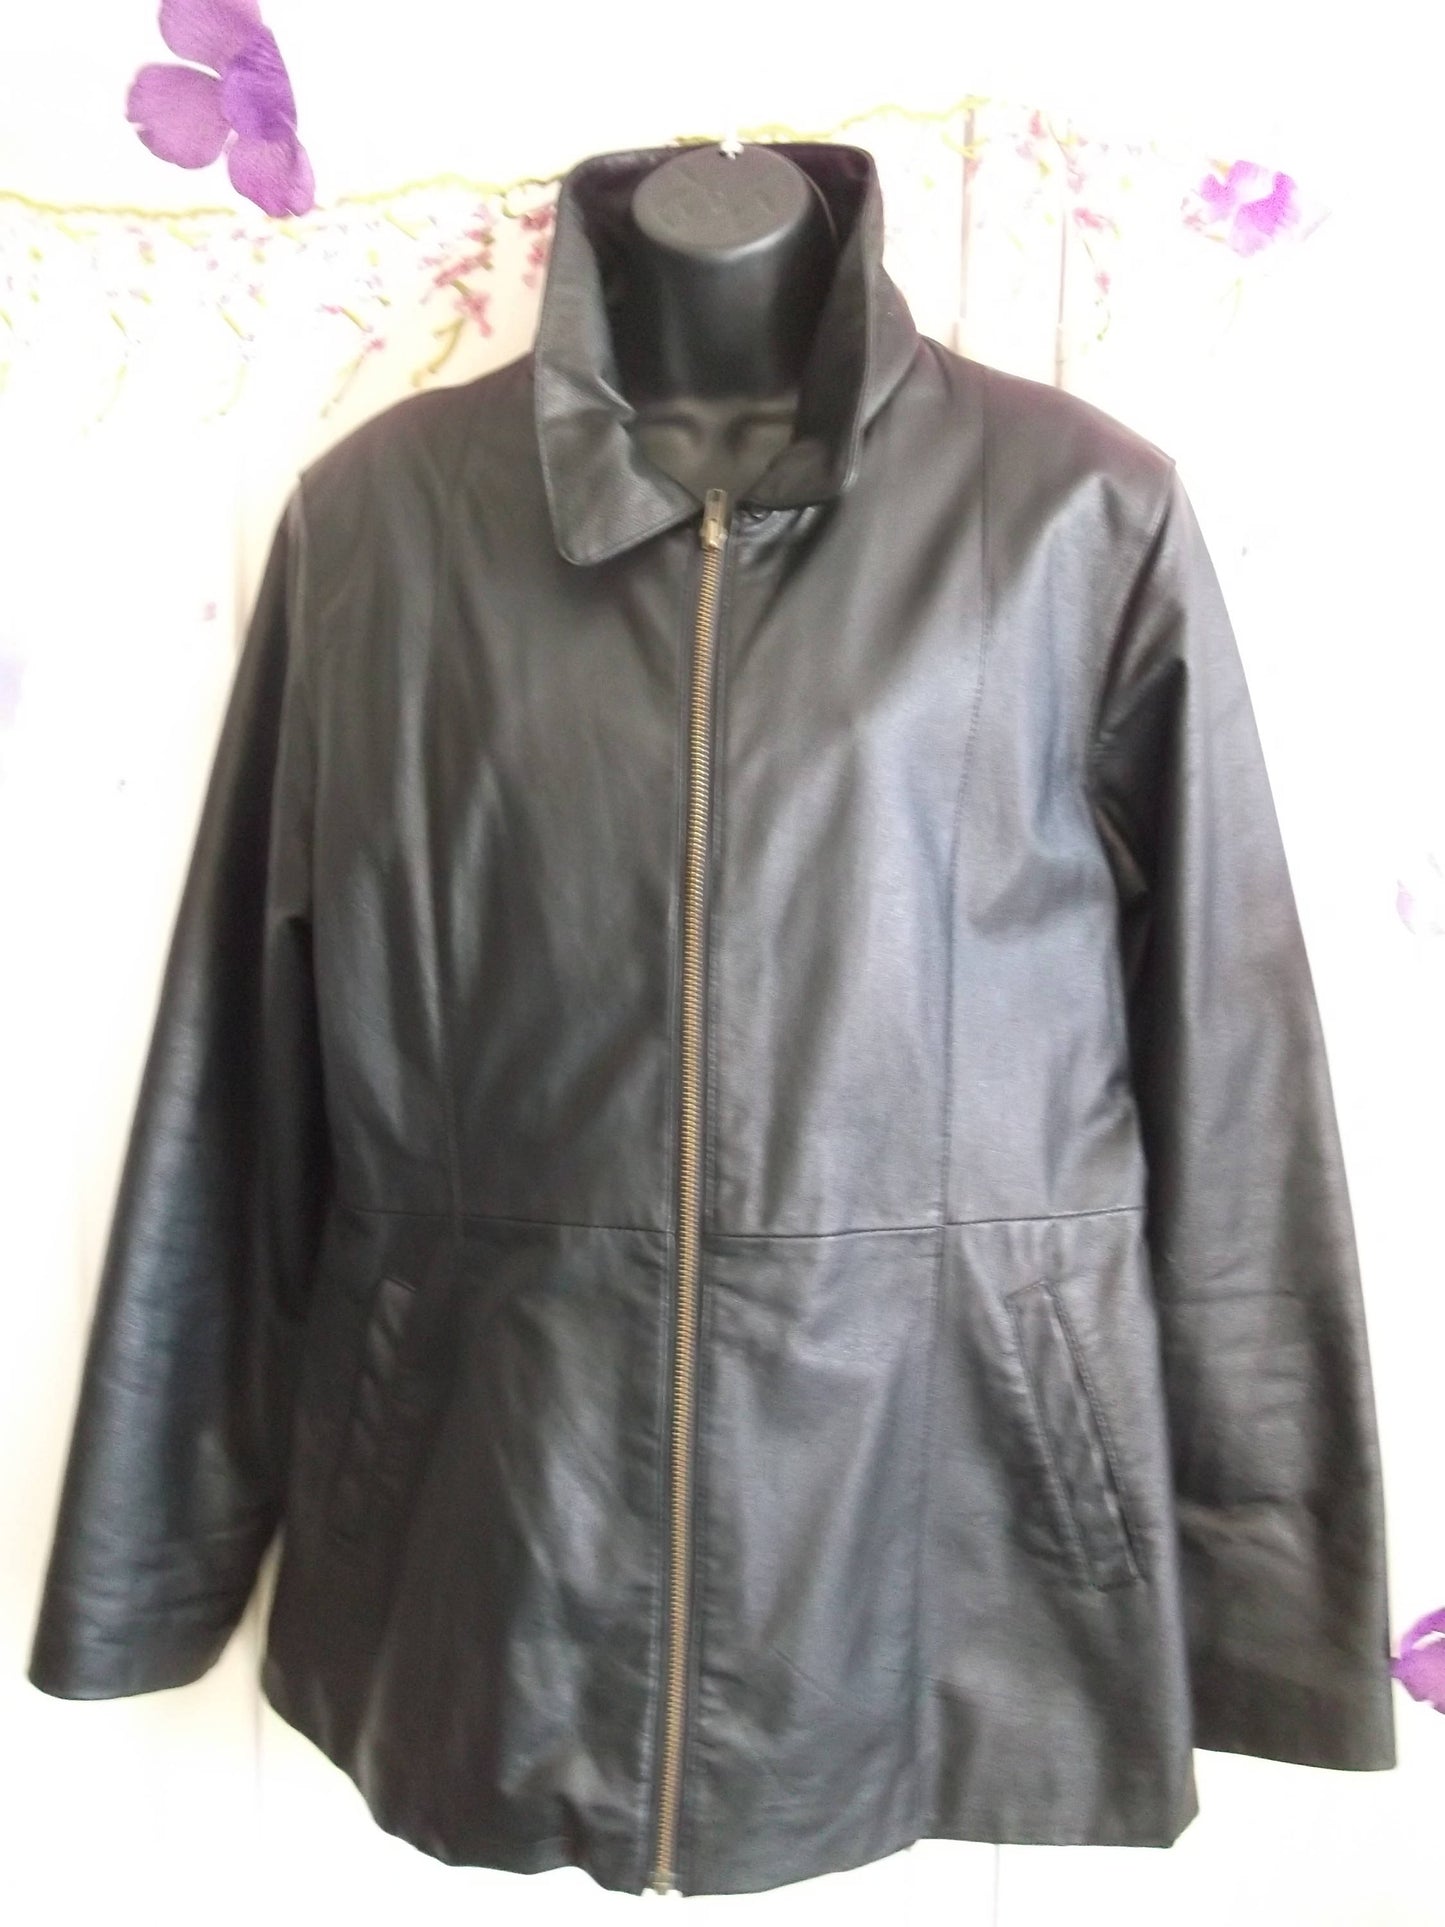 Stunning, Black leather coat 3/4 length,zip front,size 12.Bust 43".excellent condition Wonkey Donkey Bazaar